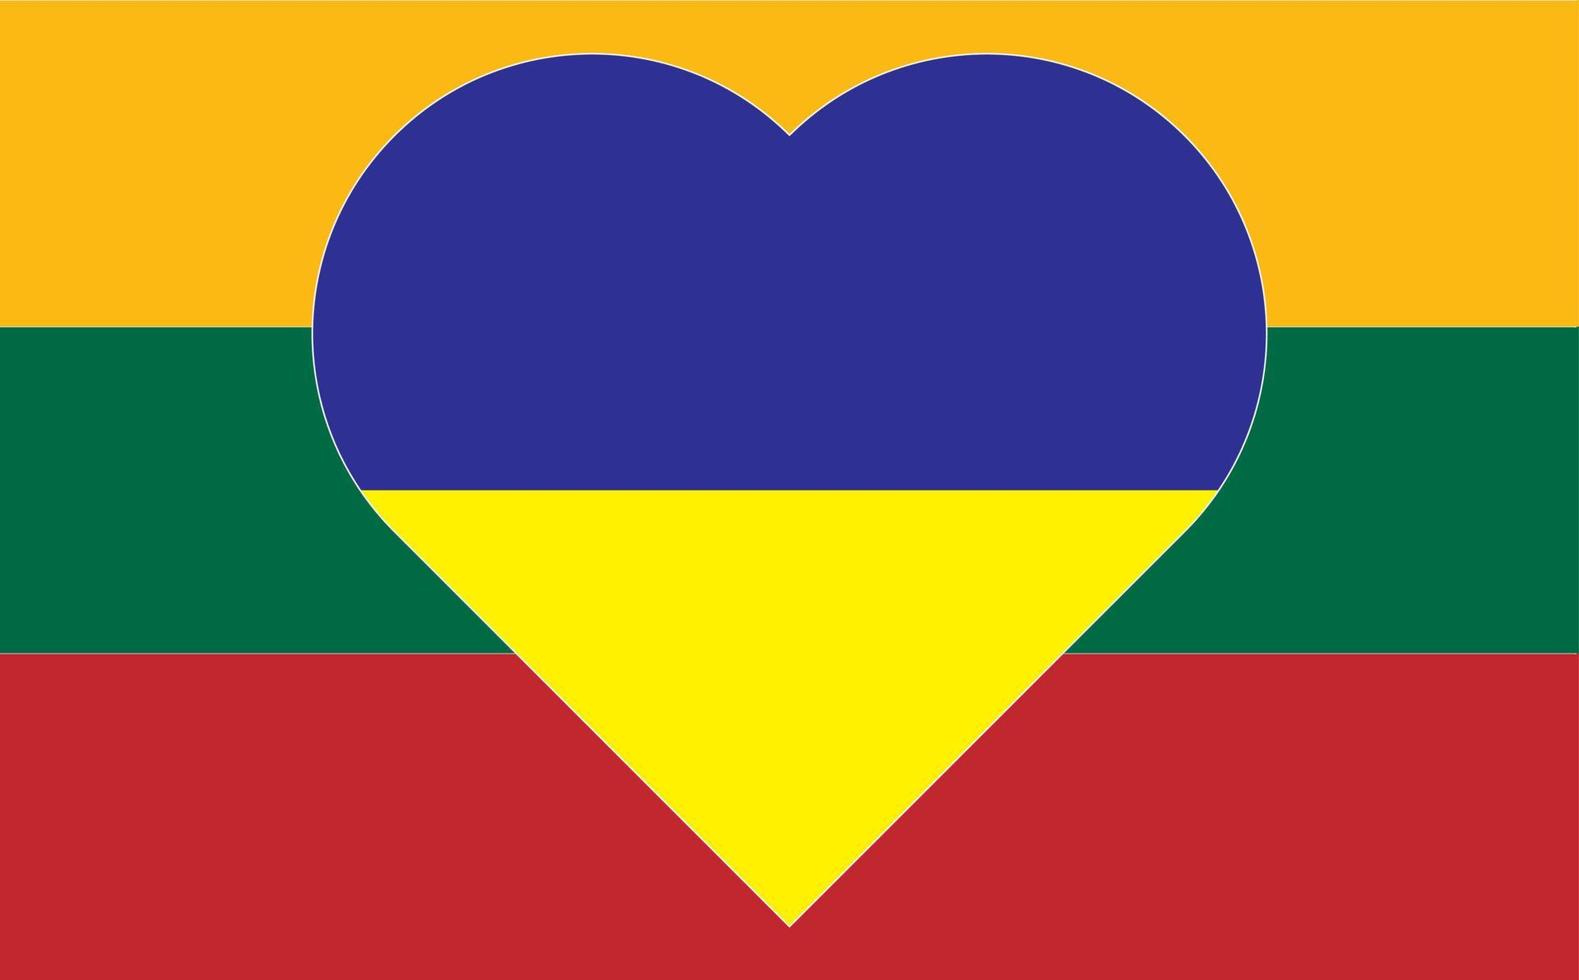 A heart painted in the colors of the flag of Ukraine on the flag of Lithuania. Vector illustration of a blue and yellow heart on the national symbol.